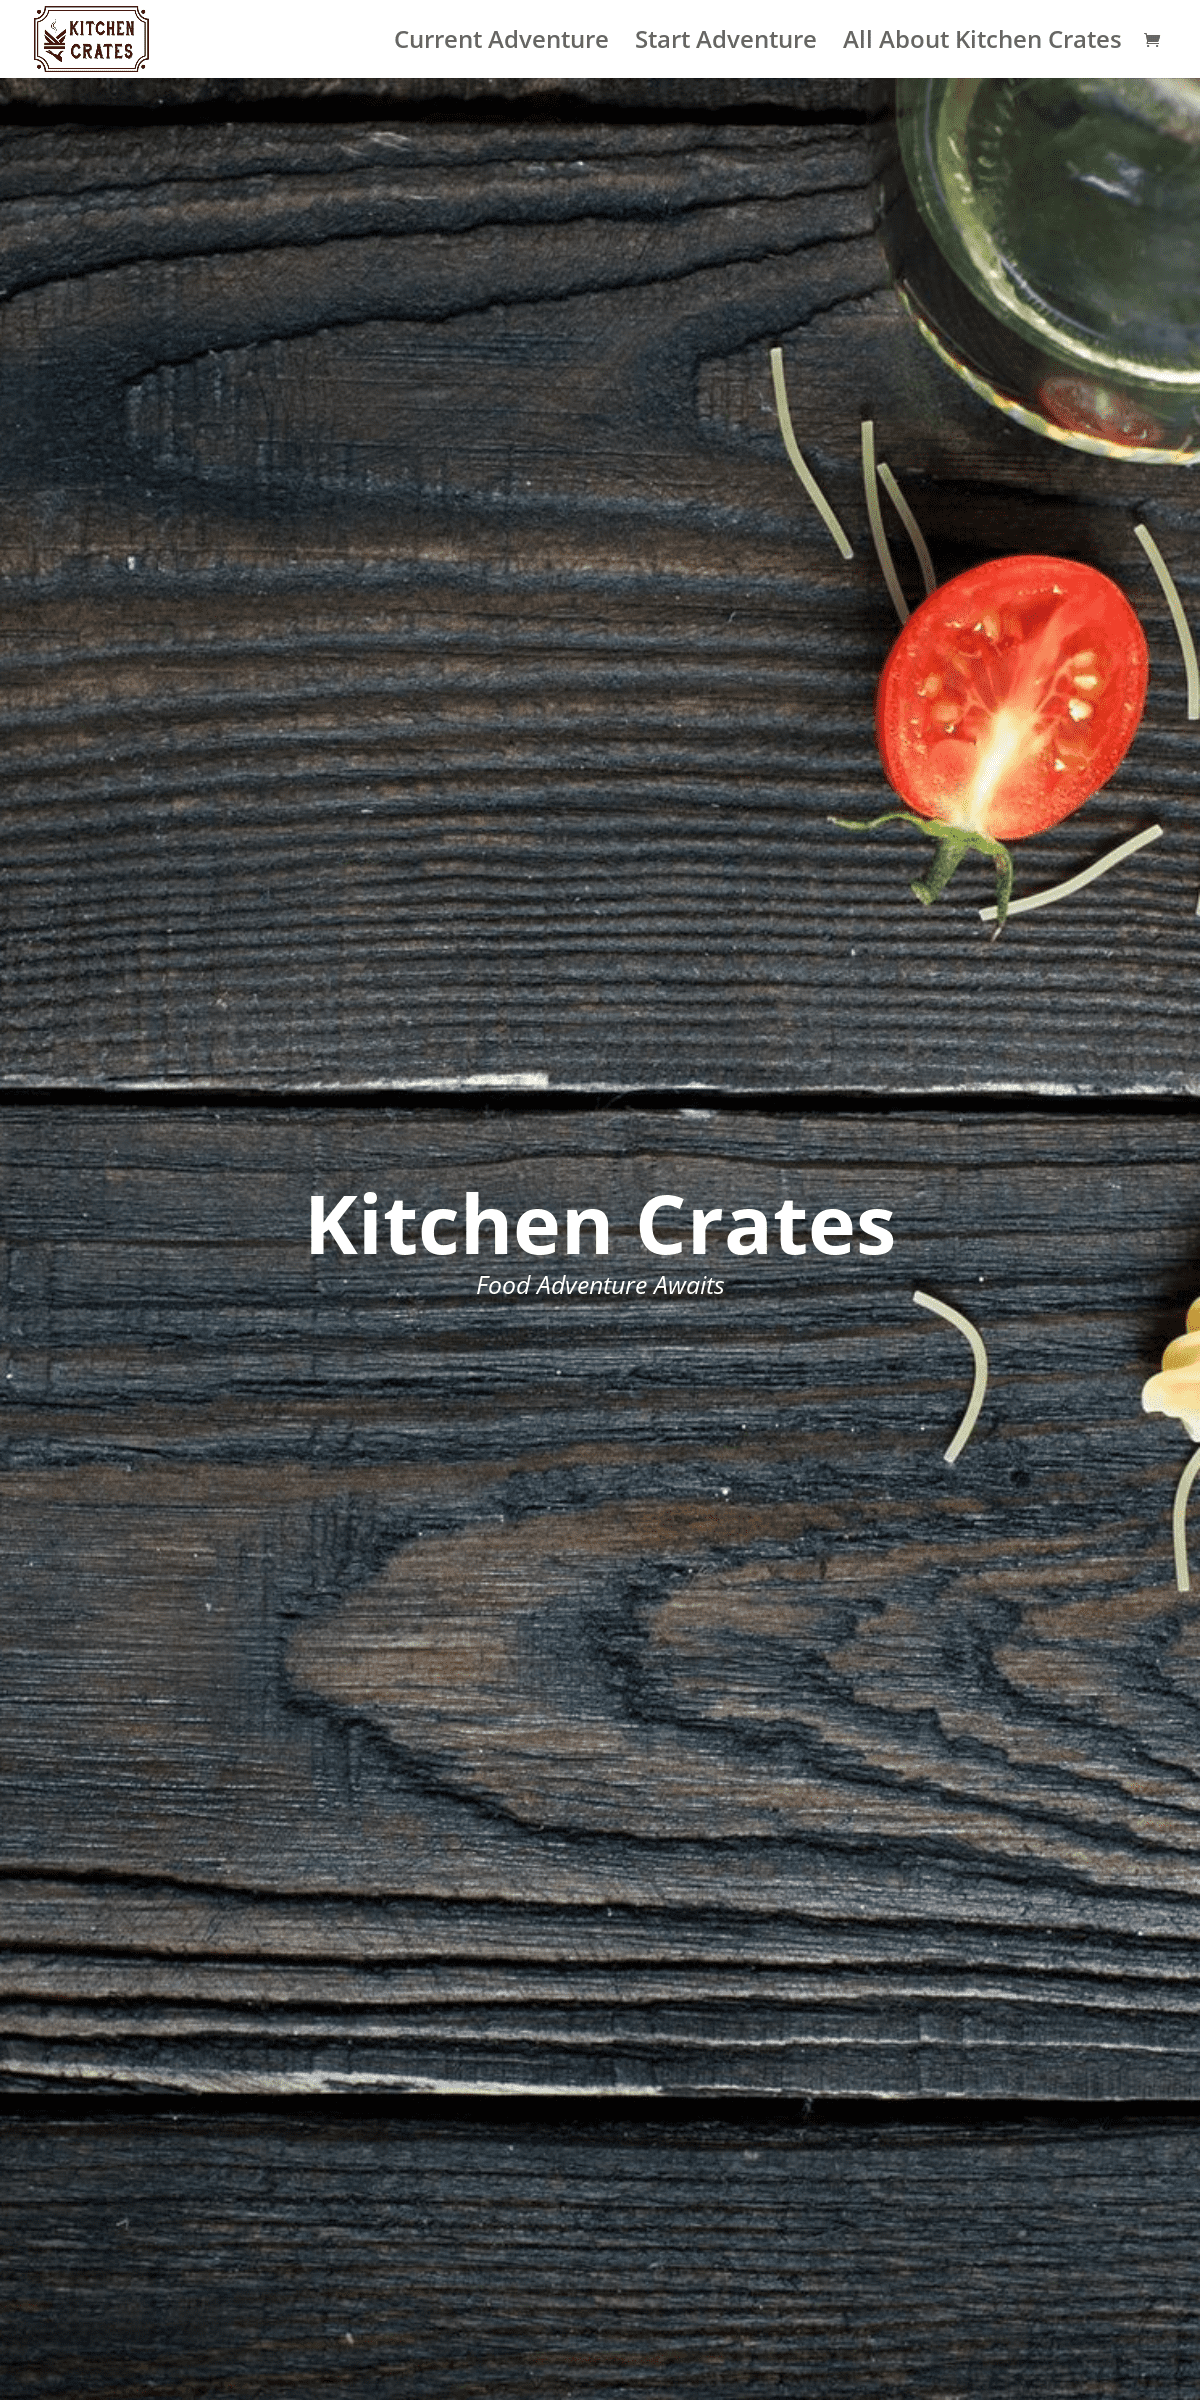 A complete backup of kitchencrates.com